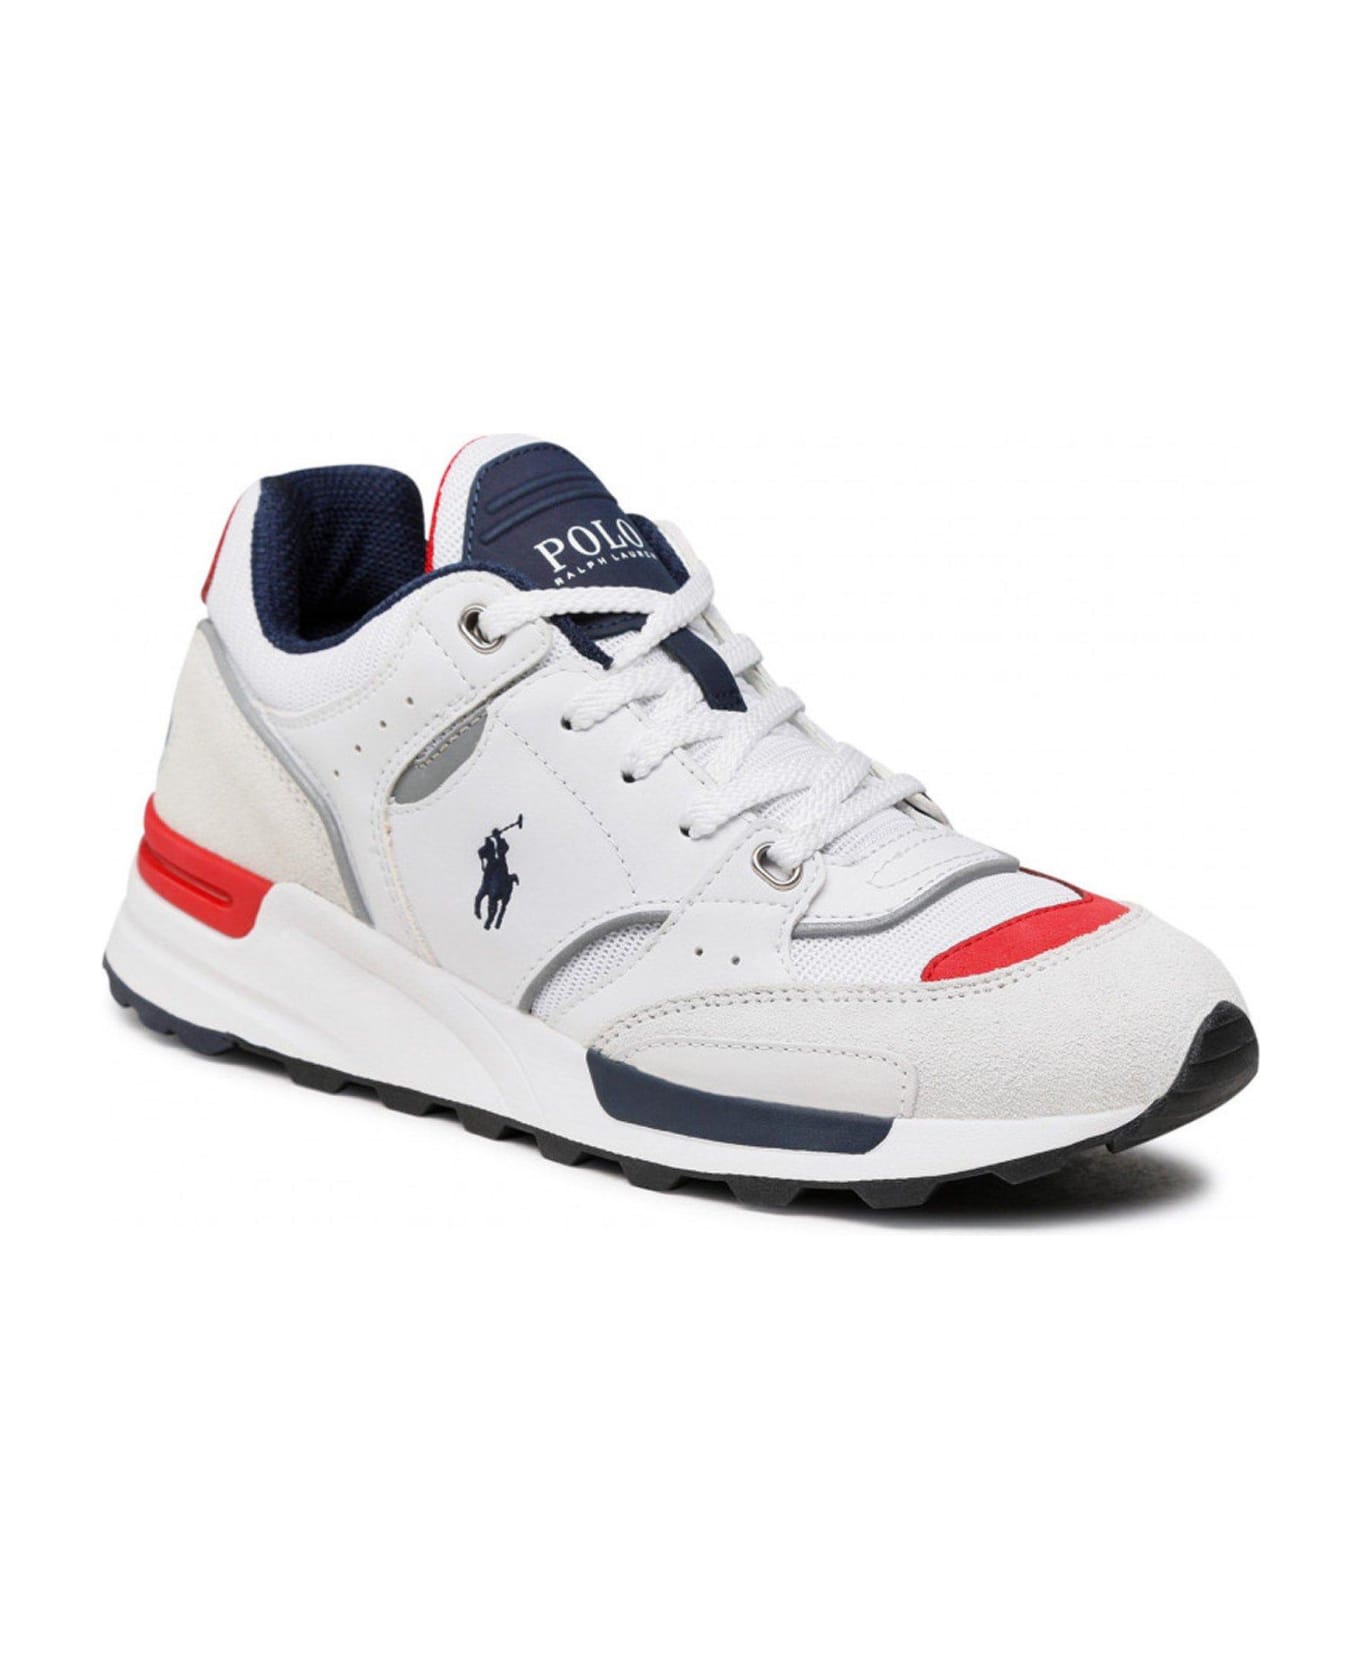 Polo Ralph Lauren Panelled Lace-up Sneakers - Grey/navy/white/red スニーカー